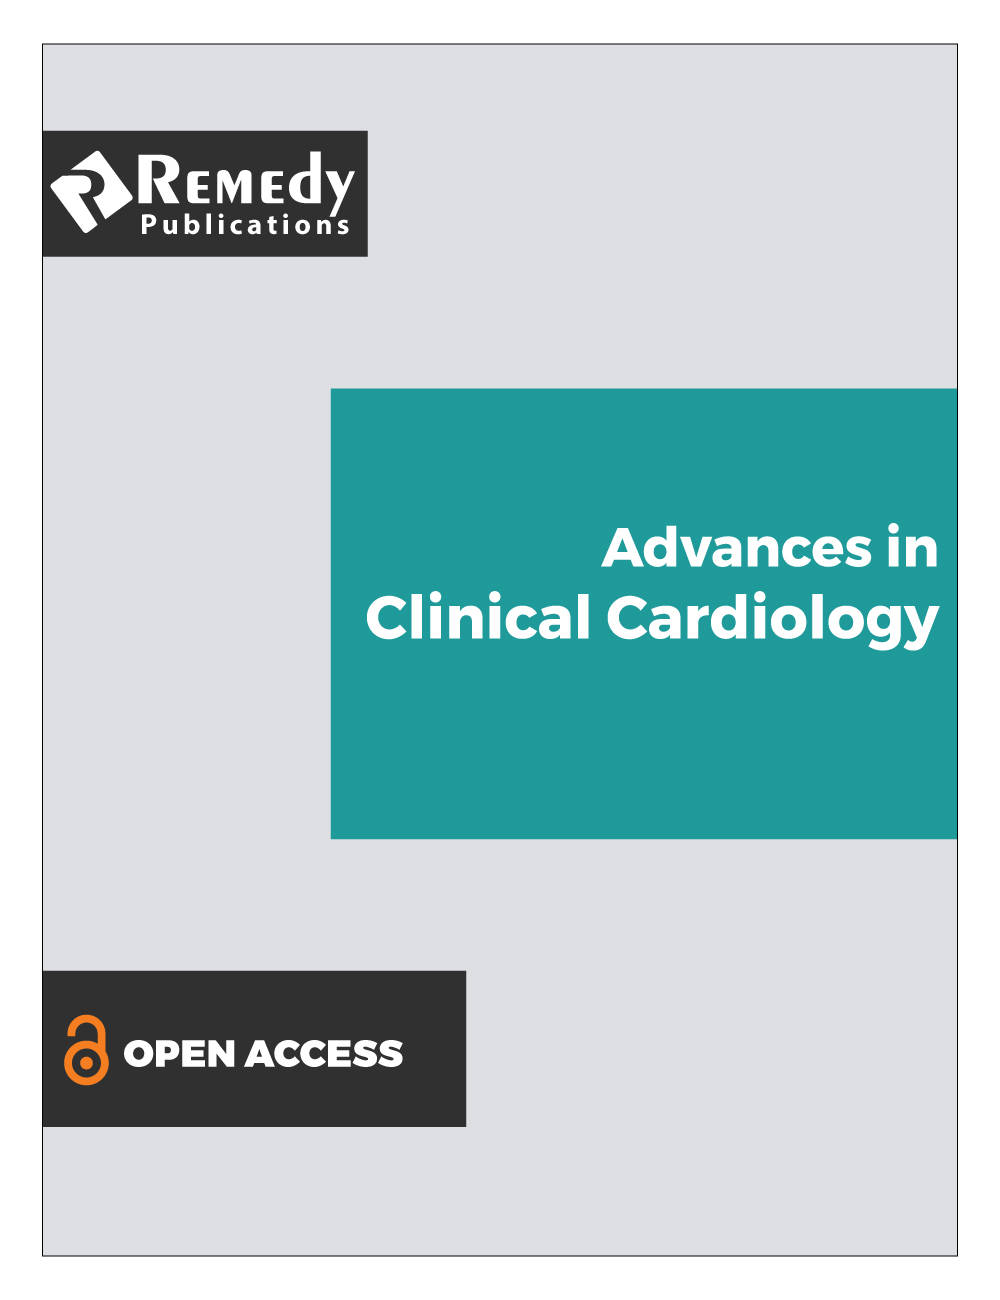 Advances in Clinical Cardiology